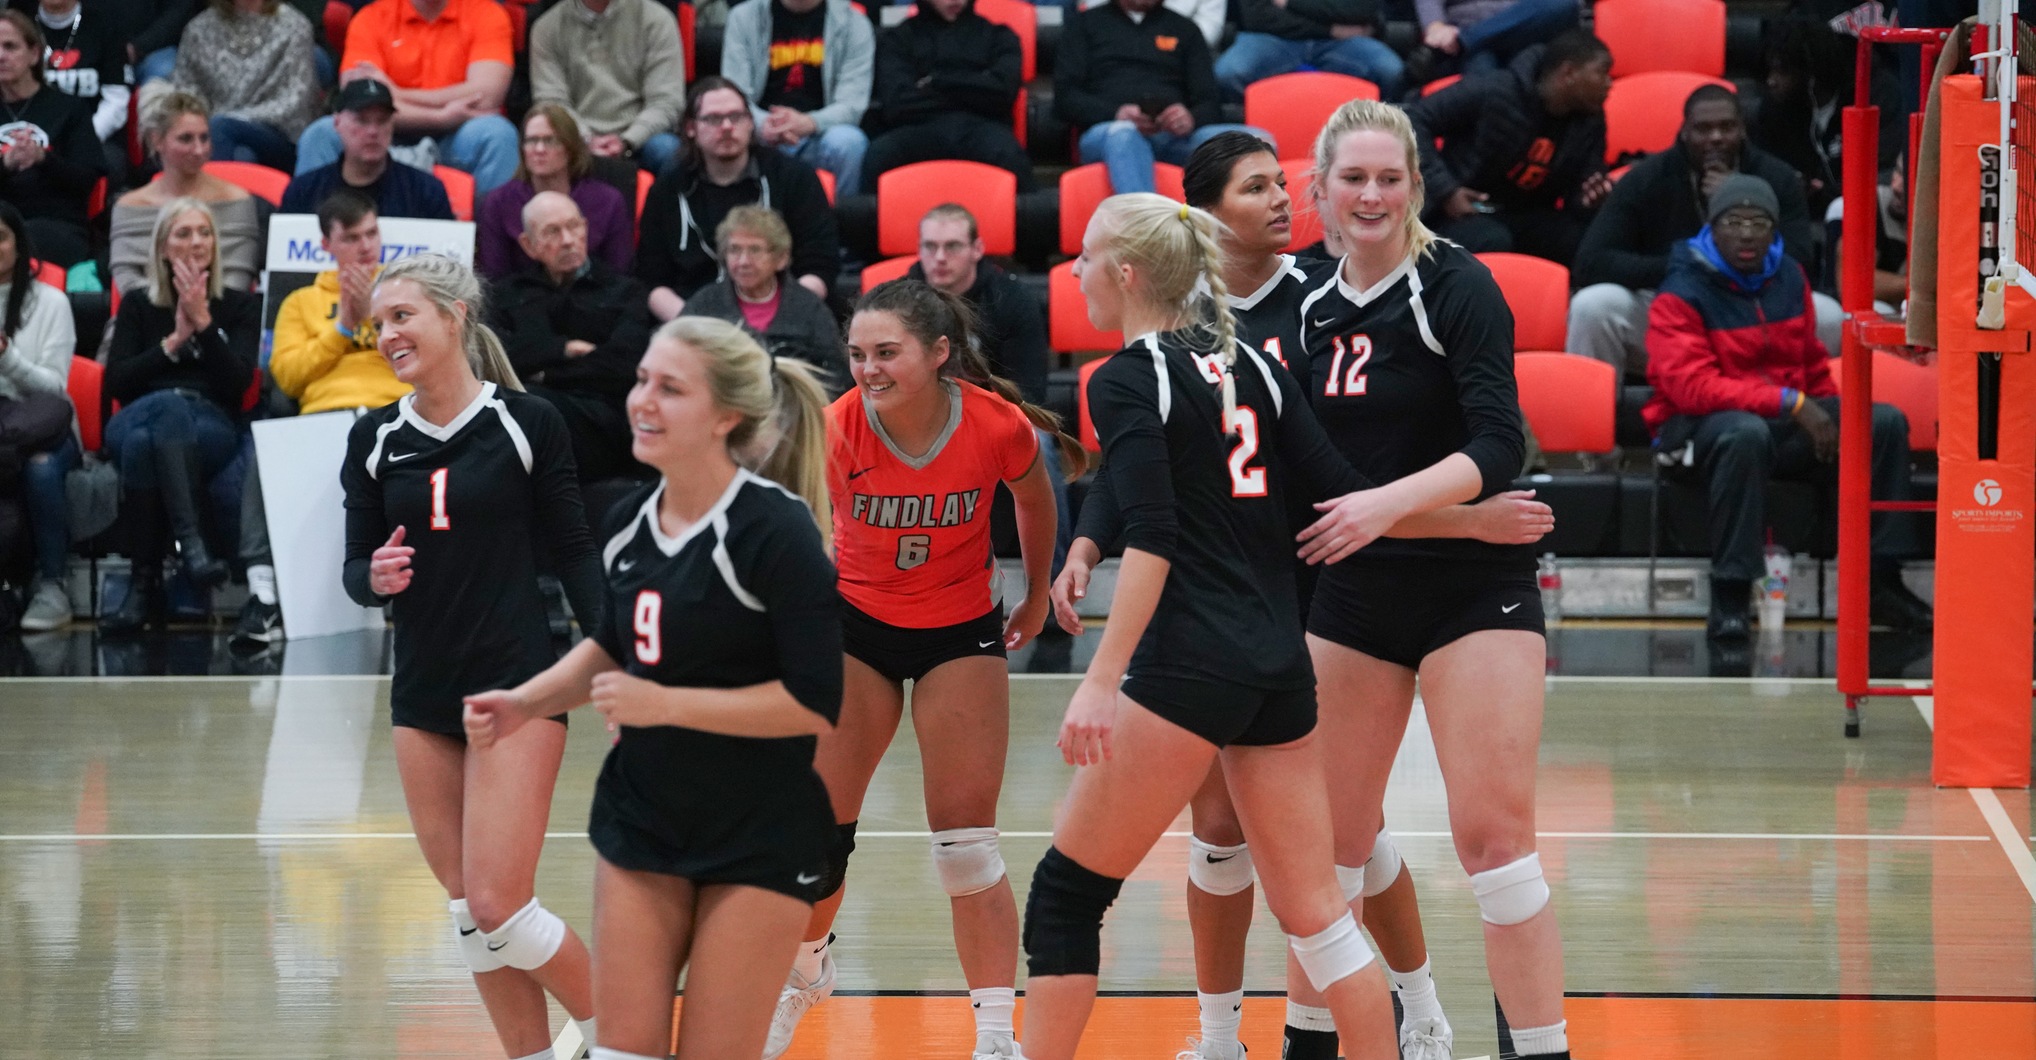 Findlay Downs Lake Erie in Three Sets